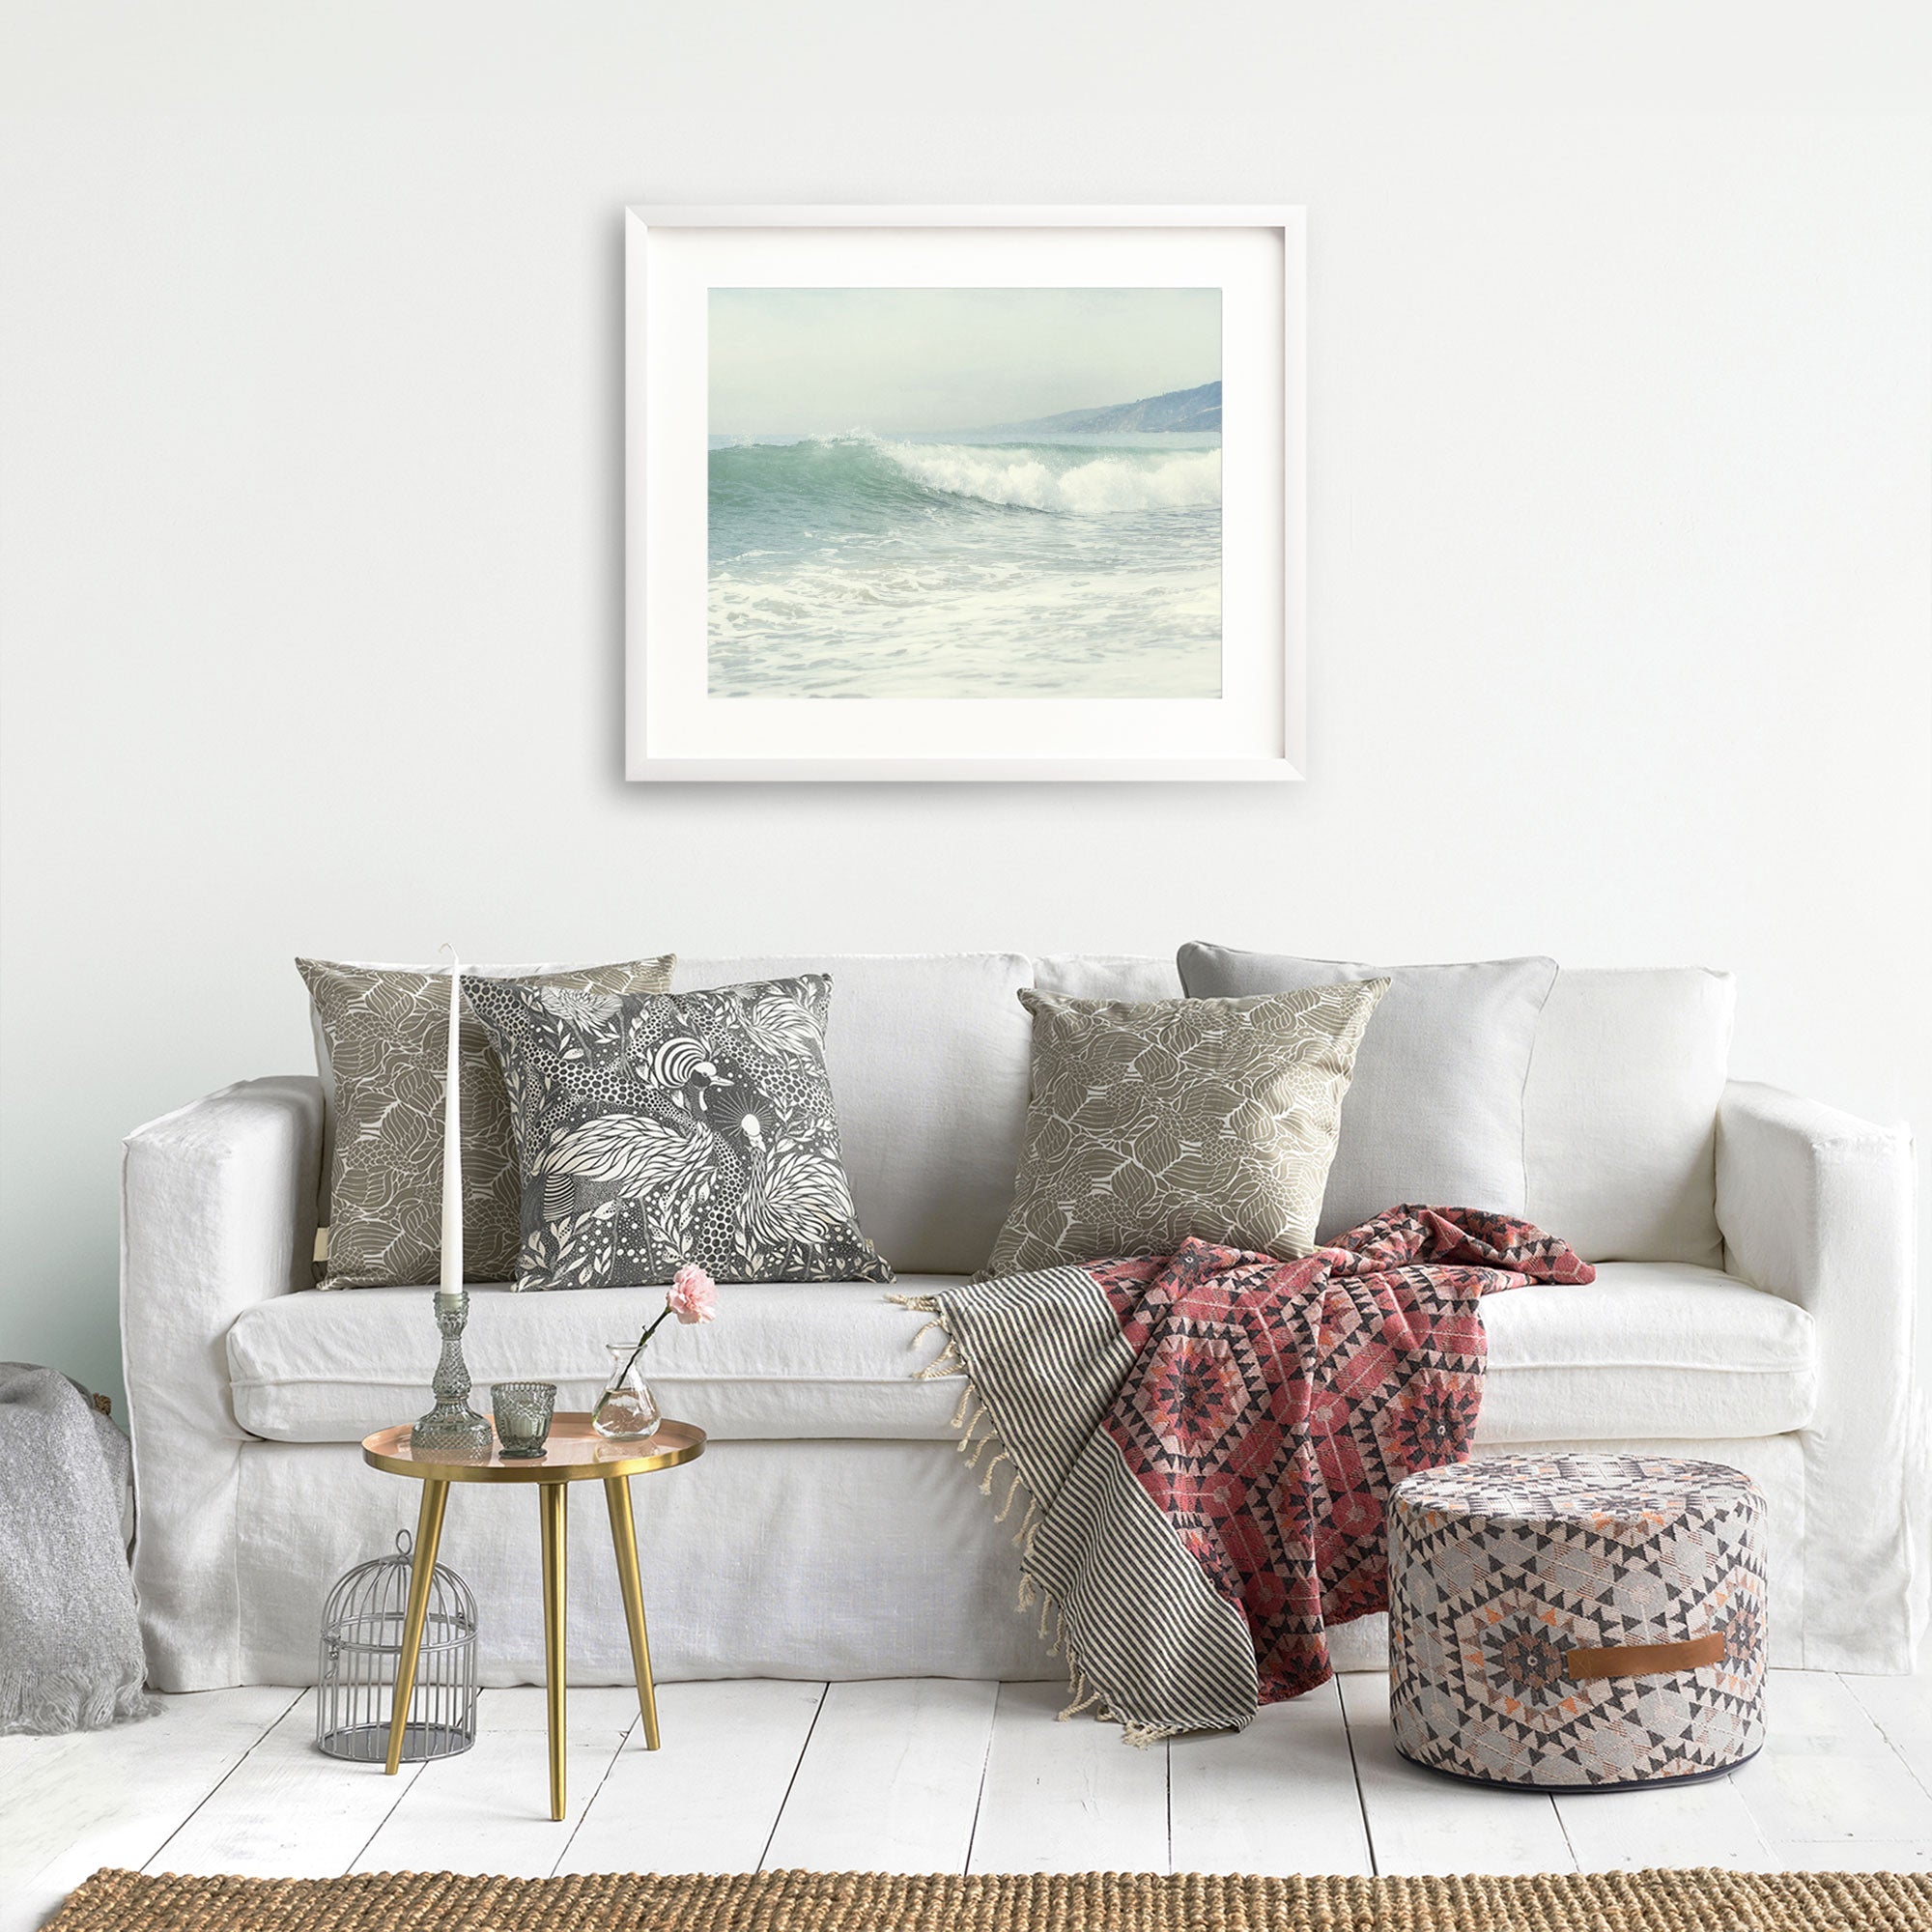 A cozy living room setup featuring a white sofa with patterned throw pillows, a draped red and gray blanket, a round gold side table with decor, a pouffe, and Offley Green's 'Breaking Surf' coastal print wall.